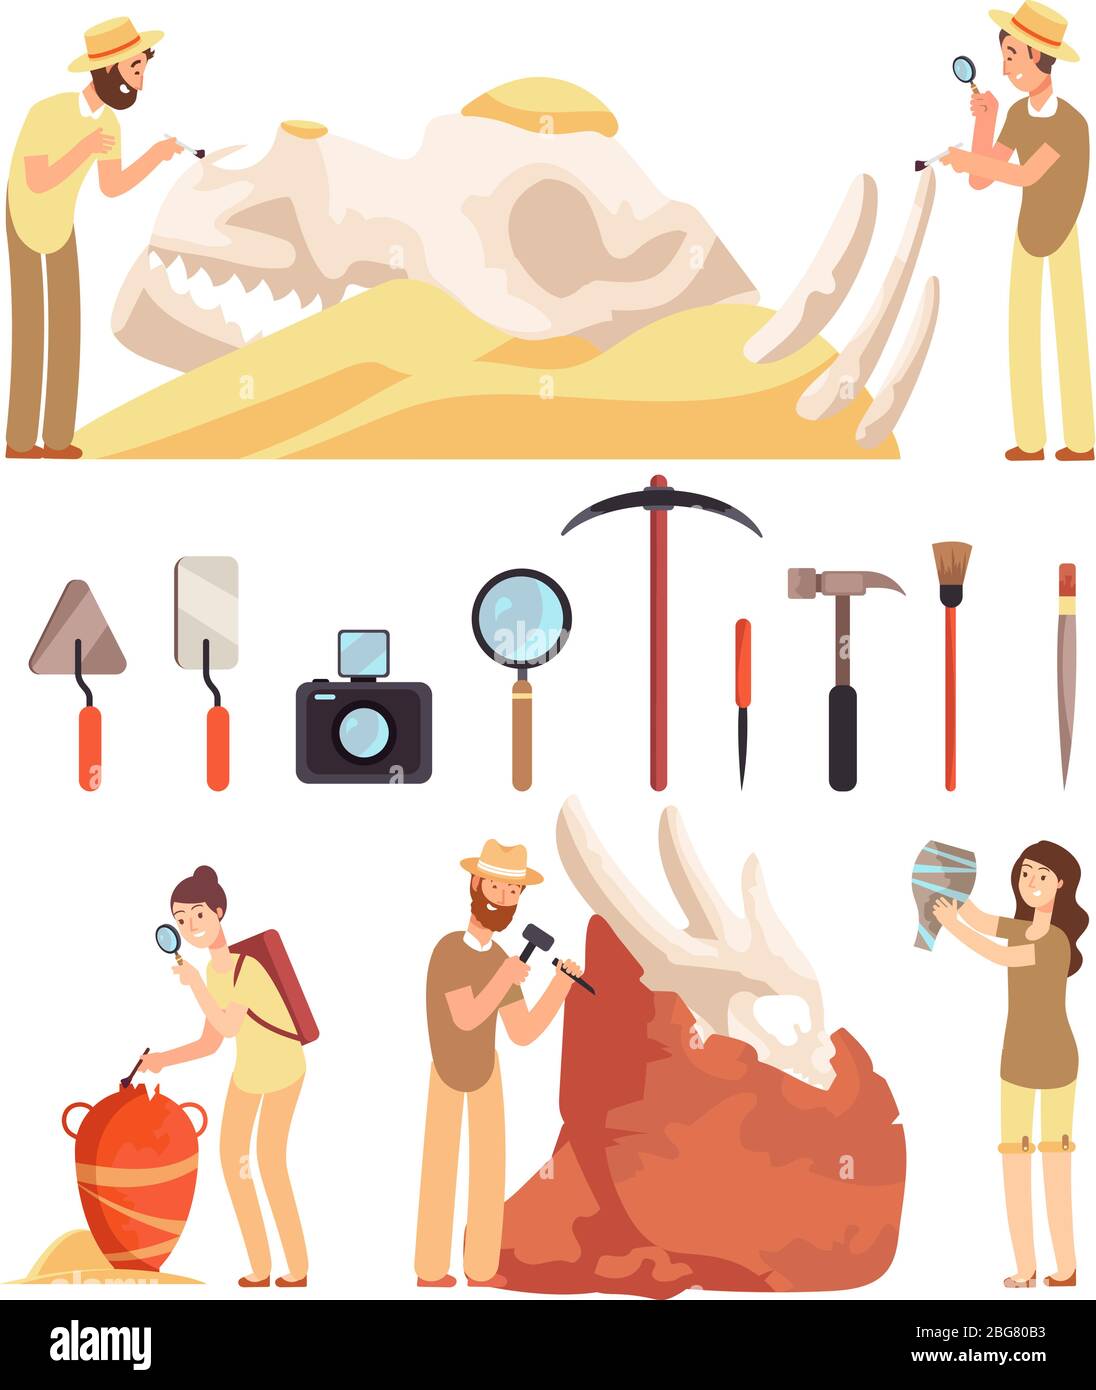 Archaeology work. Paleontologist discover historic artifacts. Archaeologist works with archaeologic tools. Vector characters set of people archaeologica professor and instruments illustration Stock Vector